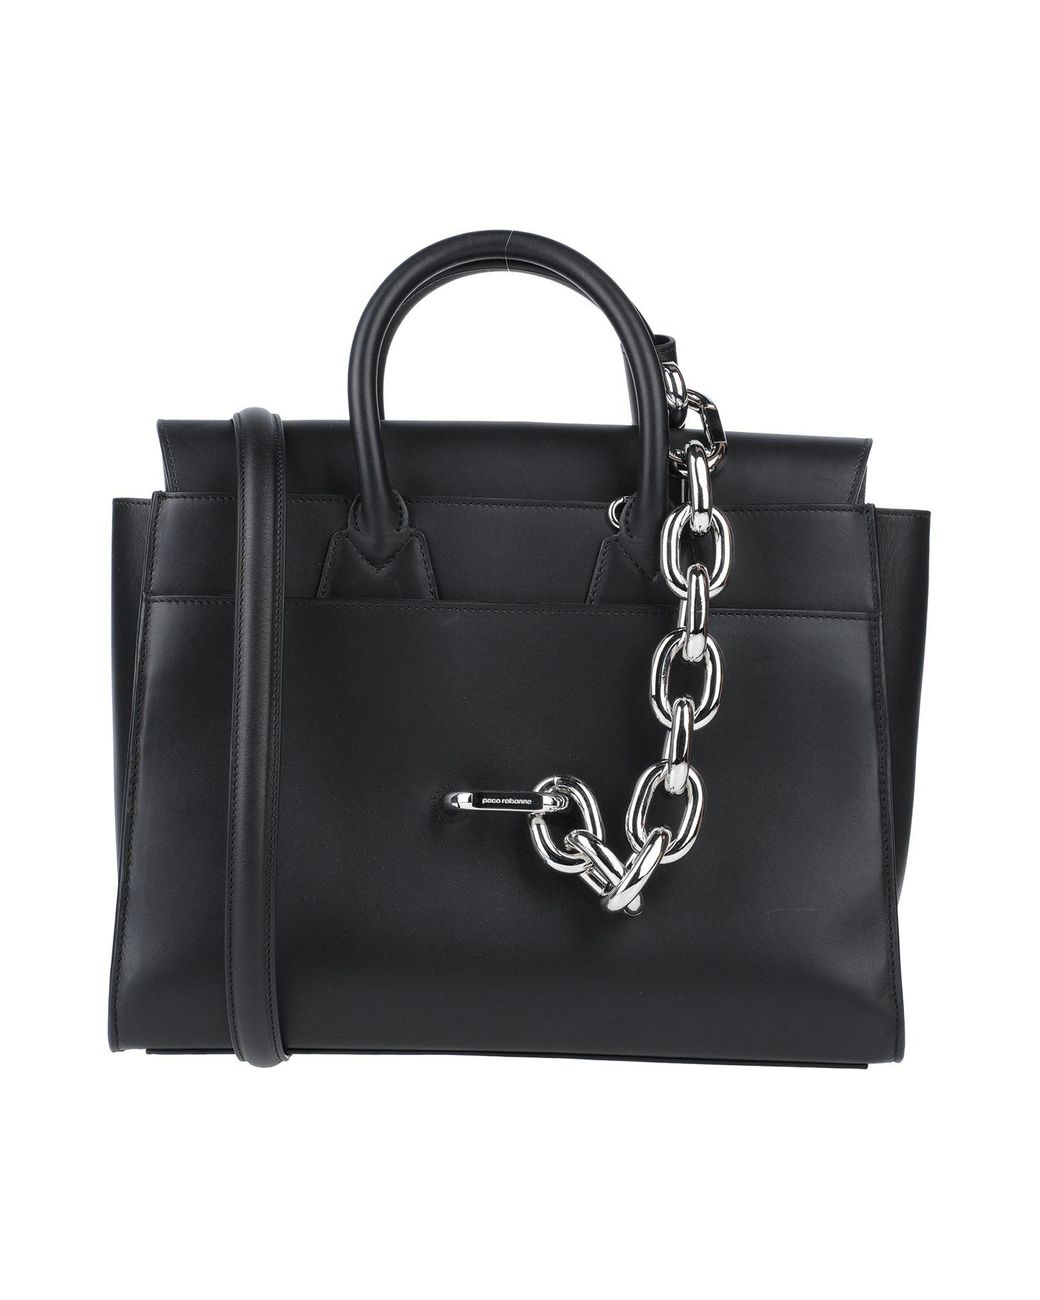 Paco Rabanne Leather Tote Bag With Chain Detail in Black - Save 62% - Lyst